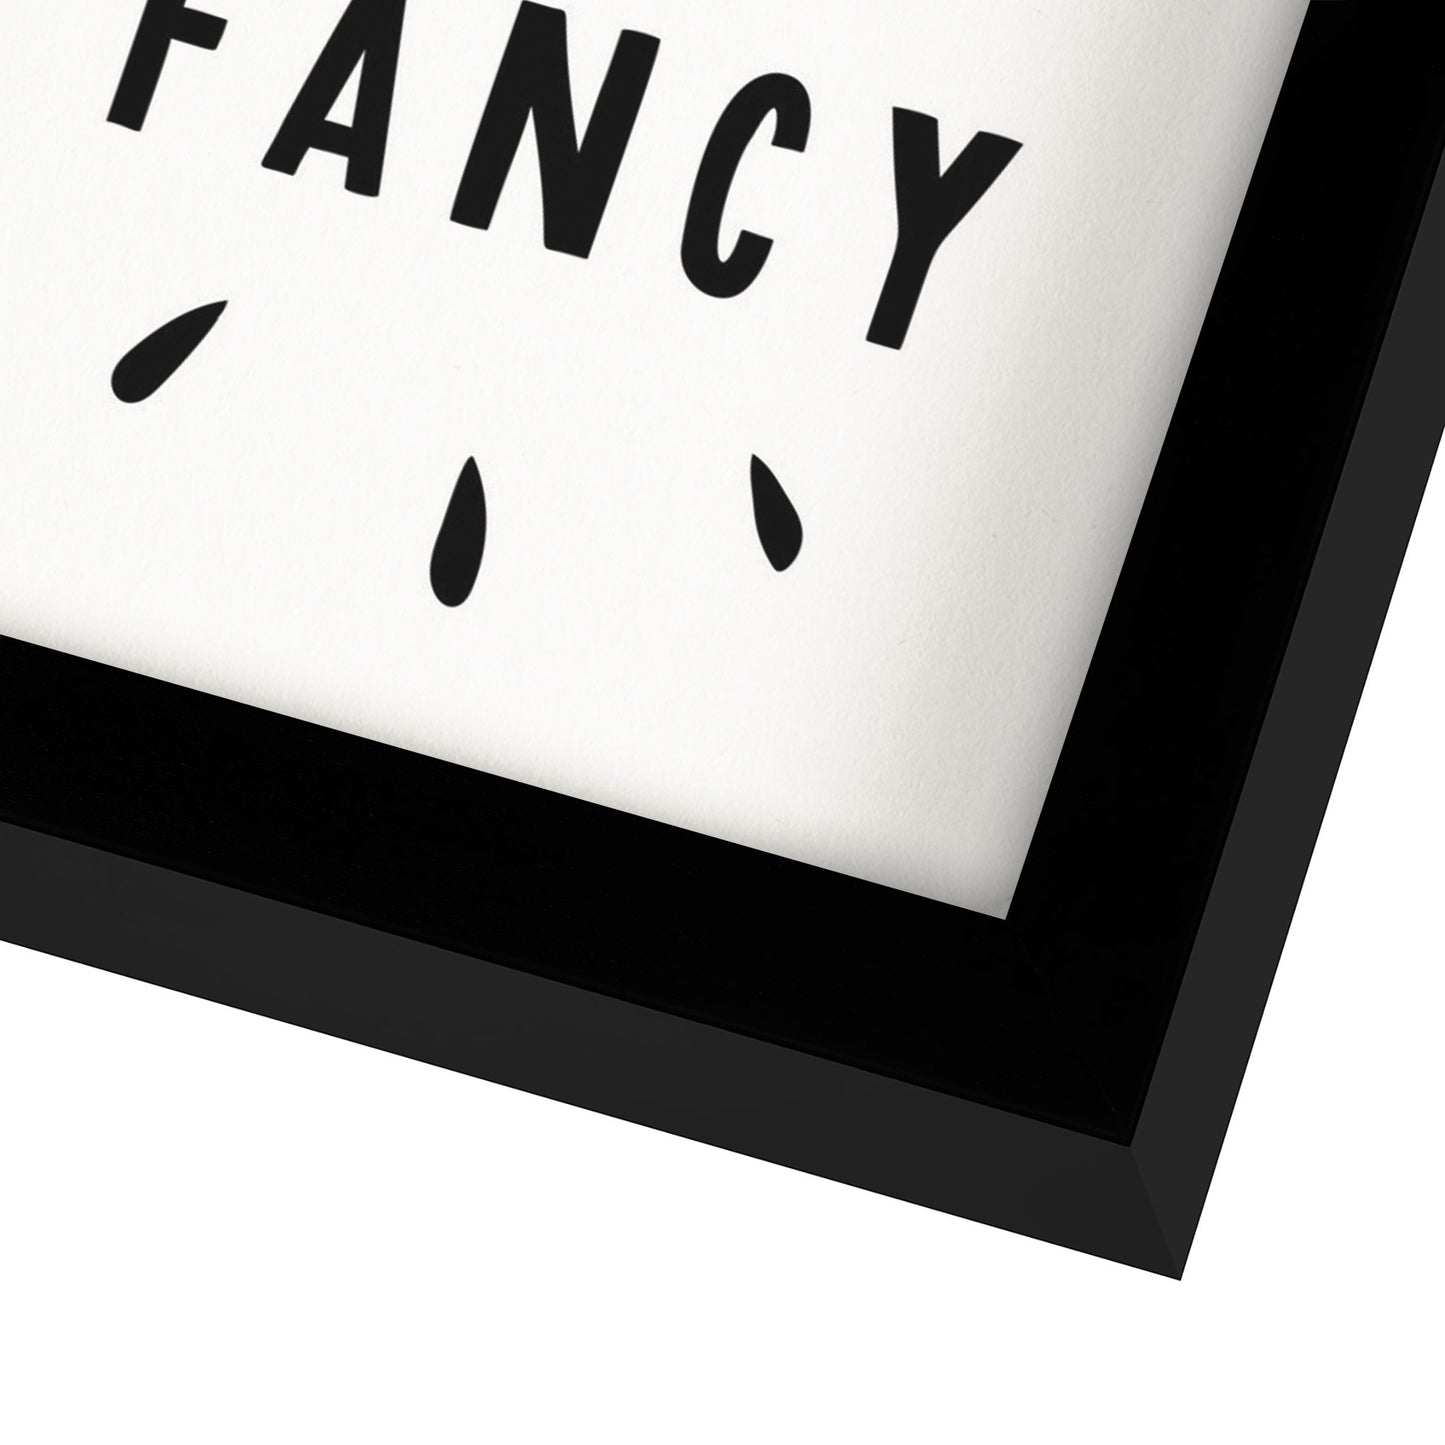 Stay Fancy By Motivated Type - Shadow Box Framed Art - Americanflat